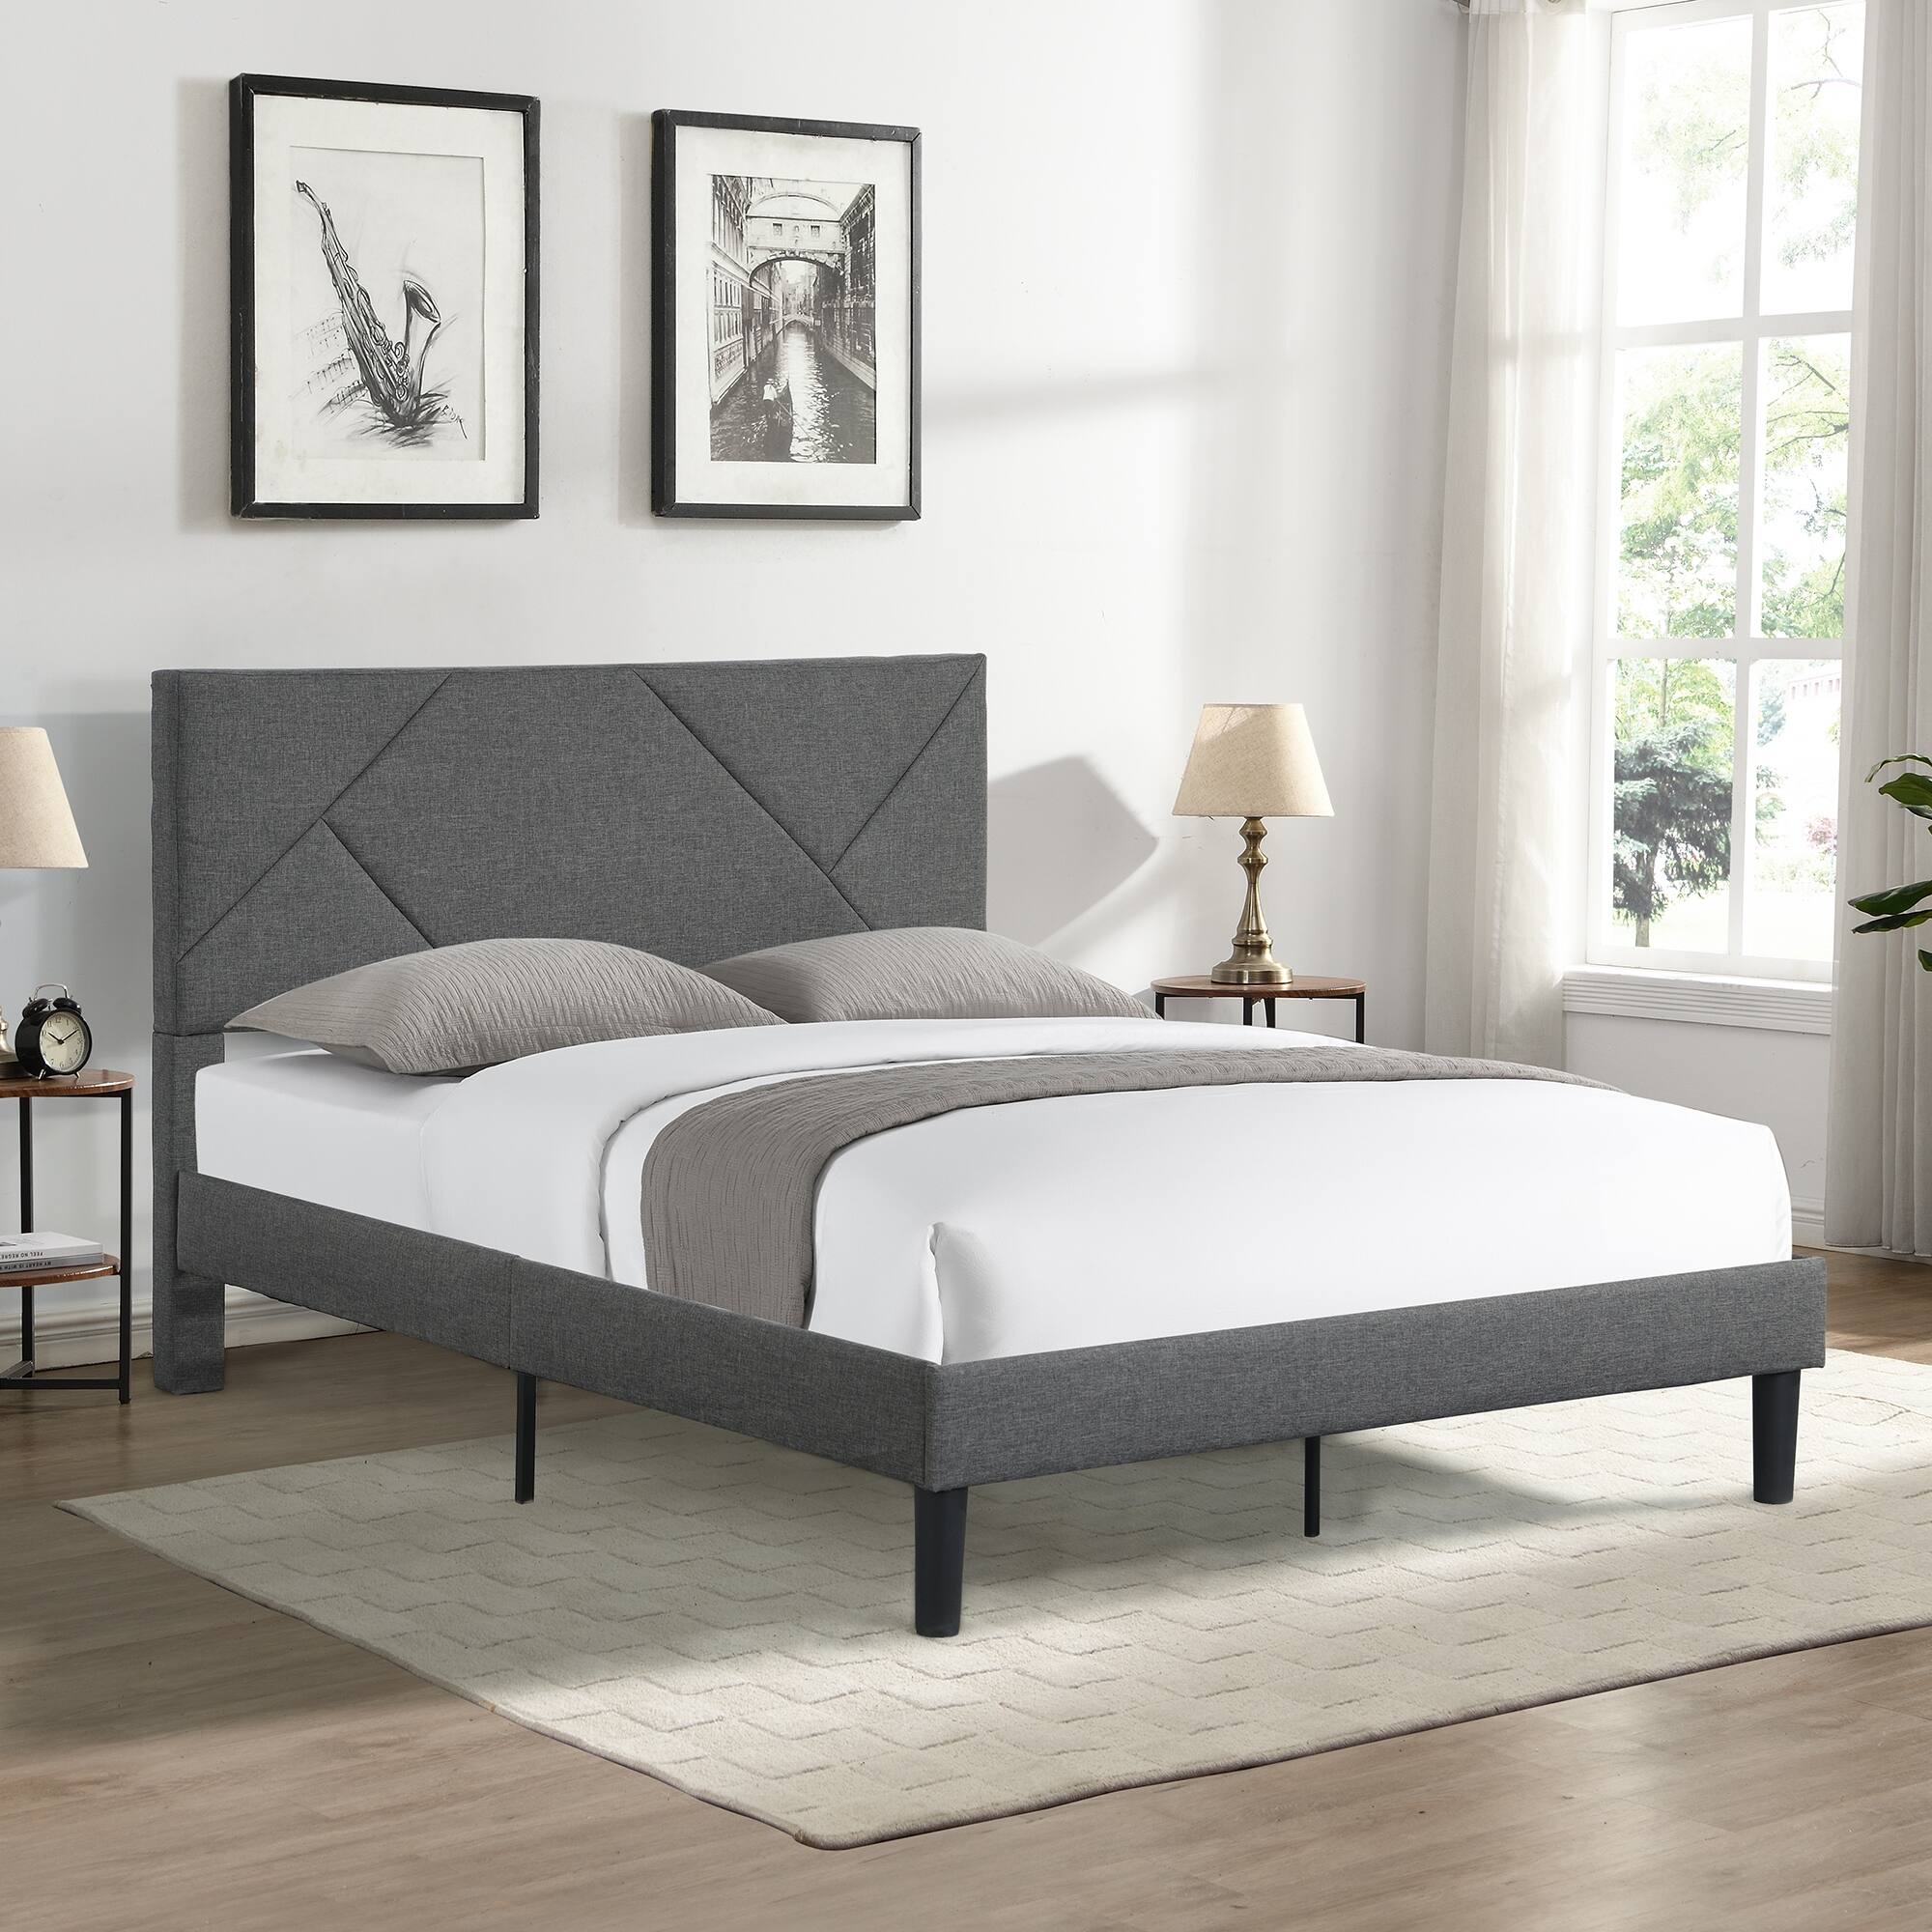 Full Size Upholstered Platform Bed Frame with Headboard, Strong Wood Slat Support, Mattress Foundation,Gray